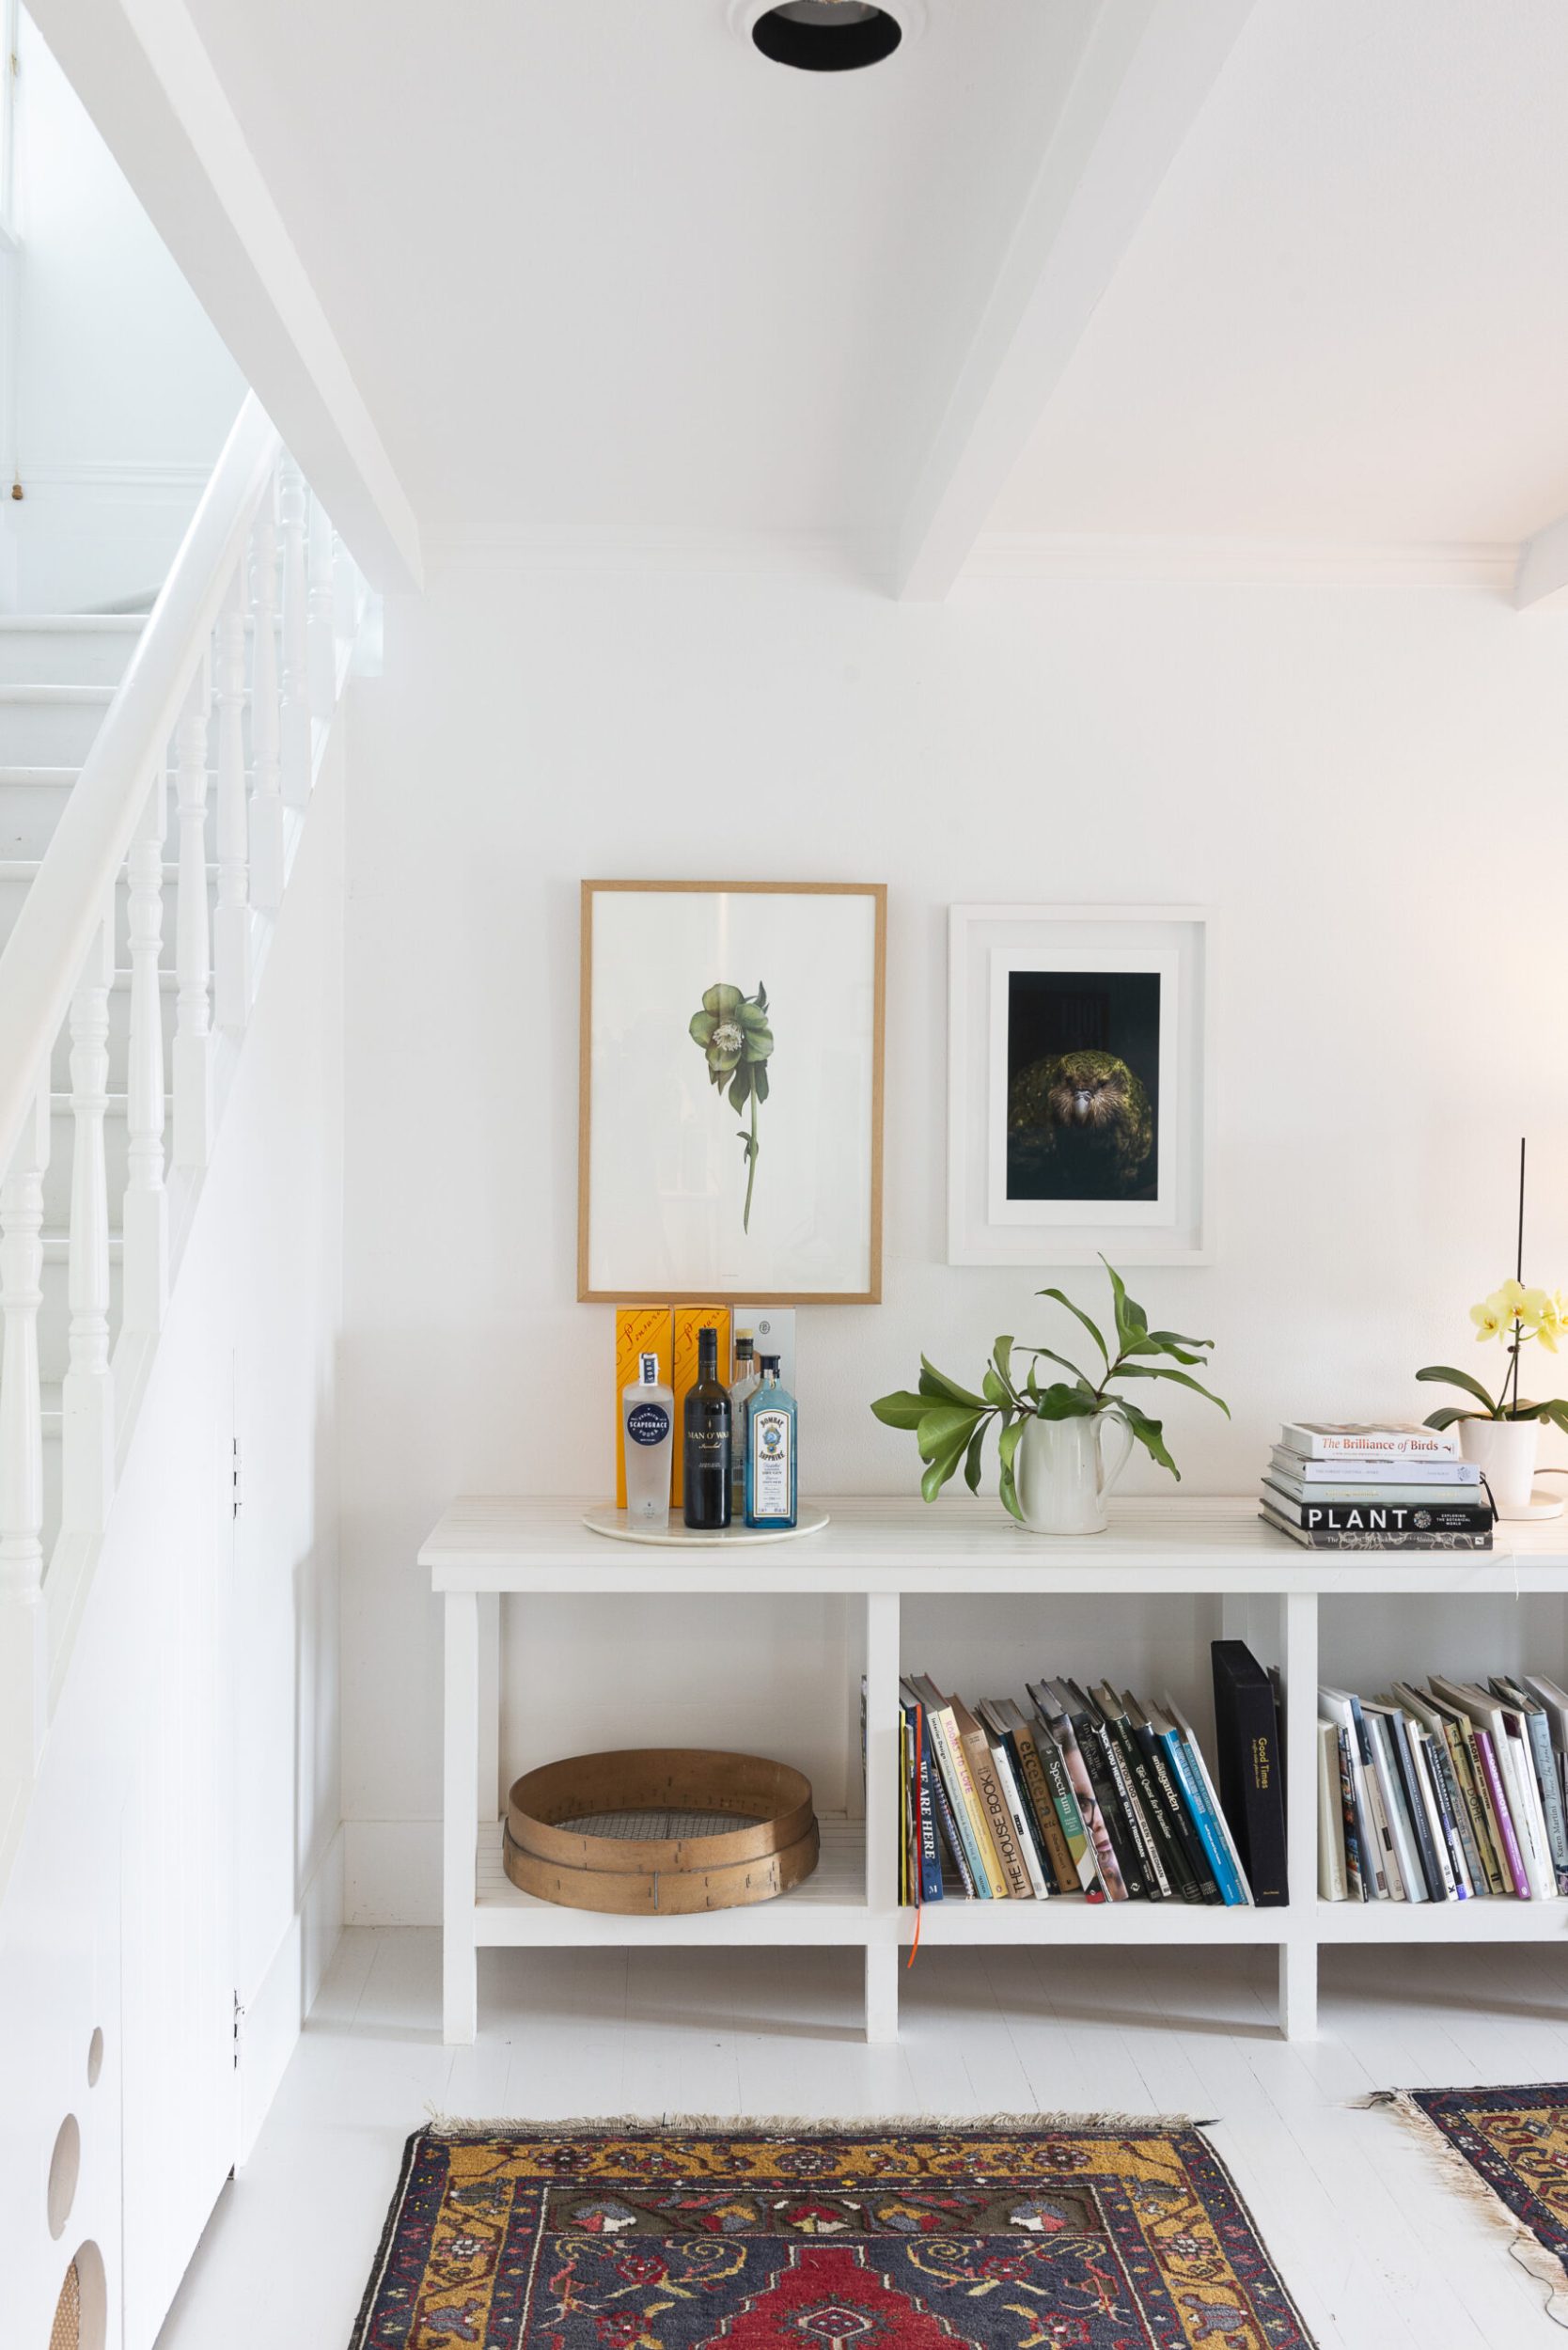 Staircase and bookshelf in Claudia Zinzan's home